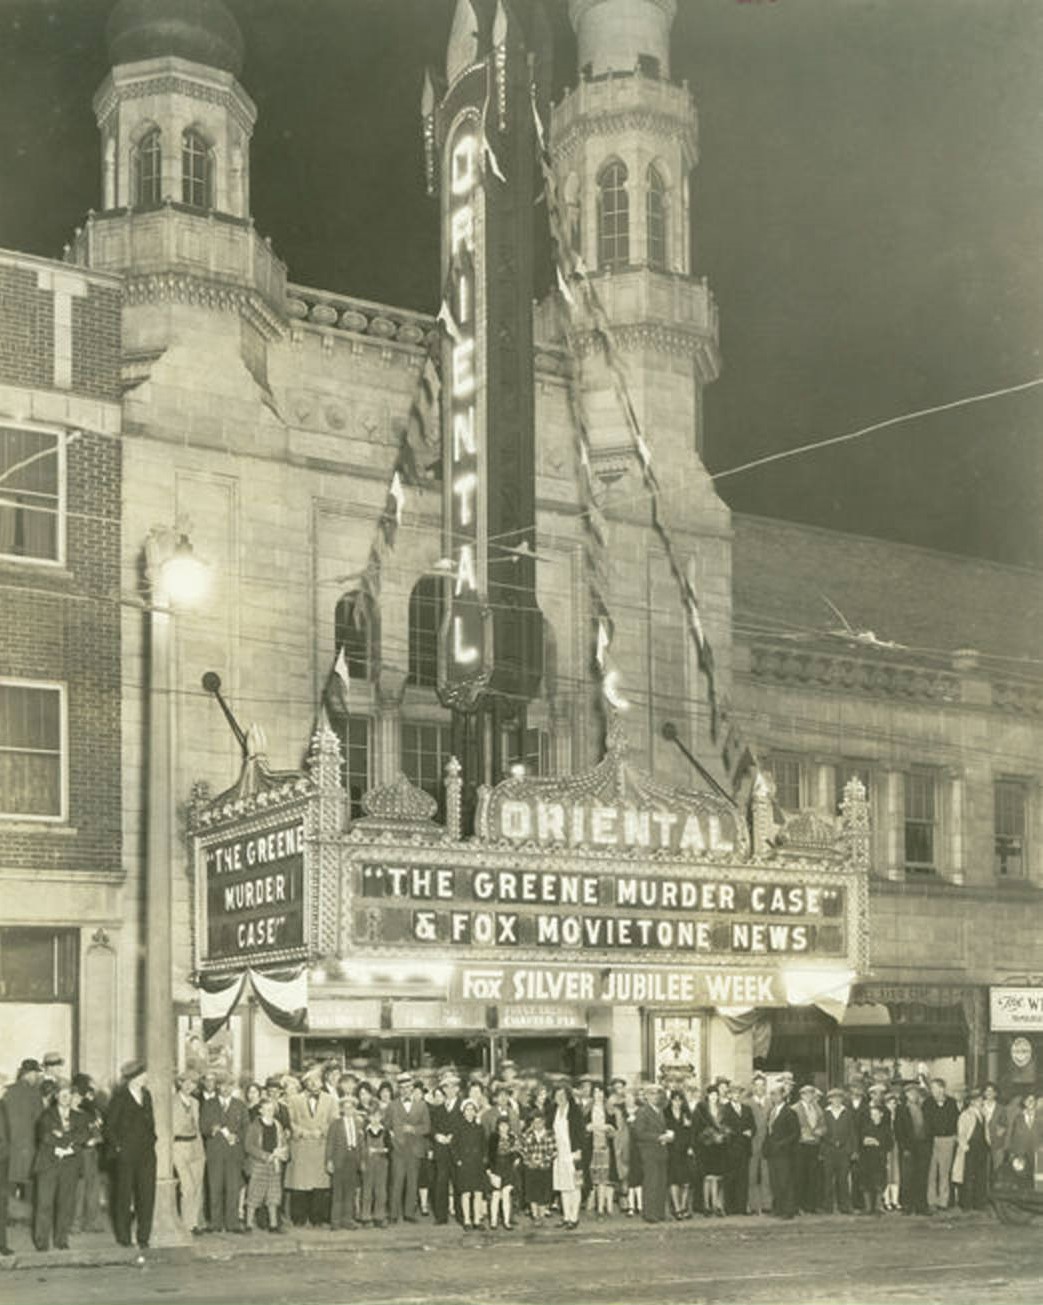 Crowd in front of the Oriental Movie Theater on October 16, 1929 to see The Greene Murder Case during Fox Silver Jubilee Week. Milwaukee Public Library.